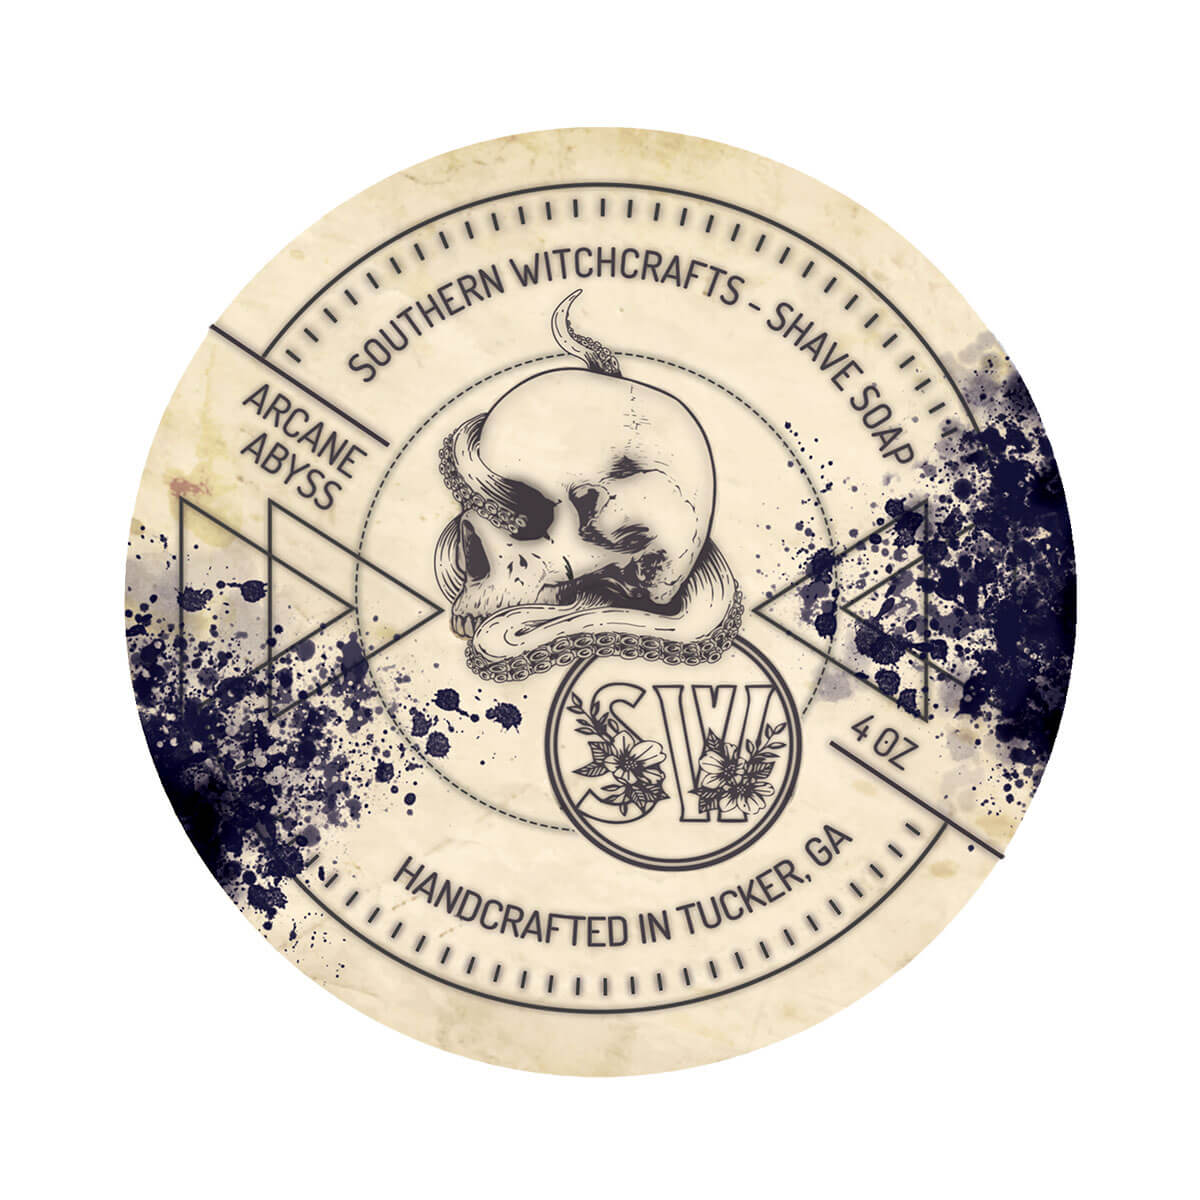 Southern Witchcrafts Arcane Abyss Shaving Soap 